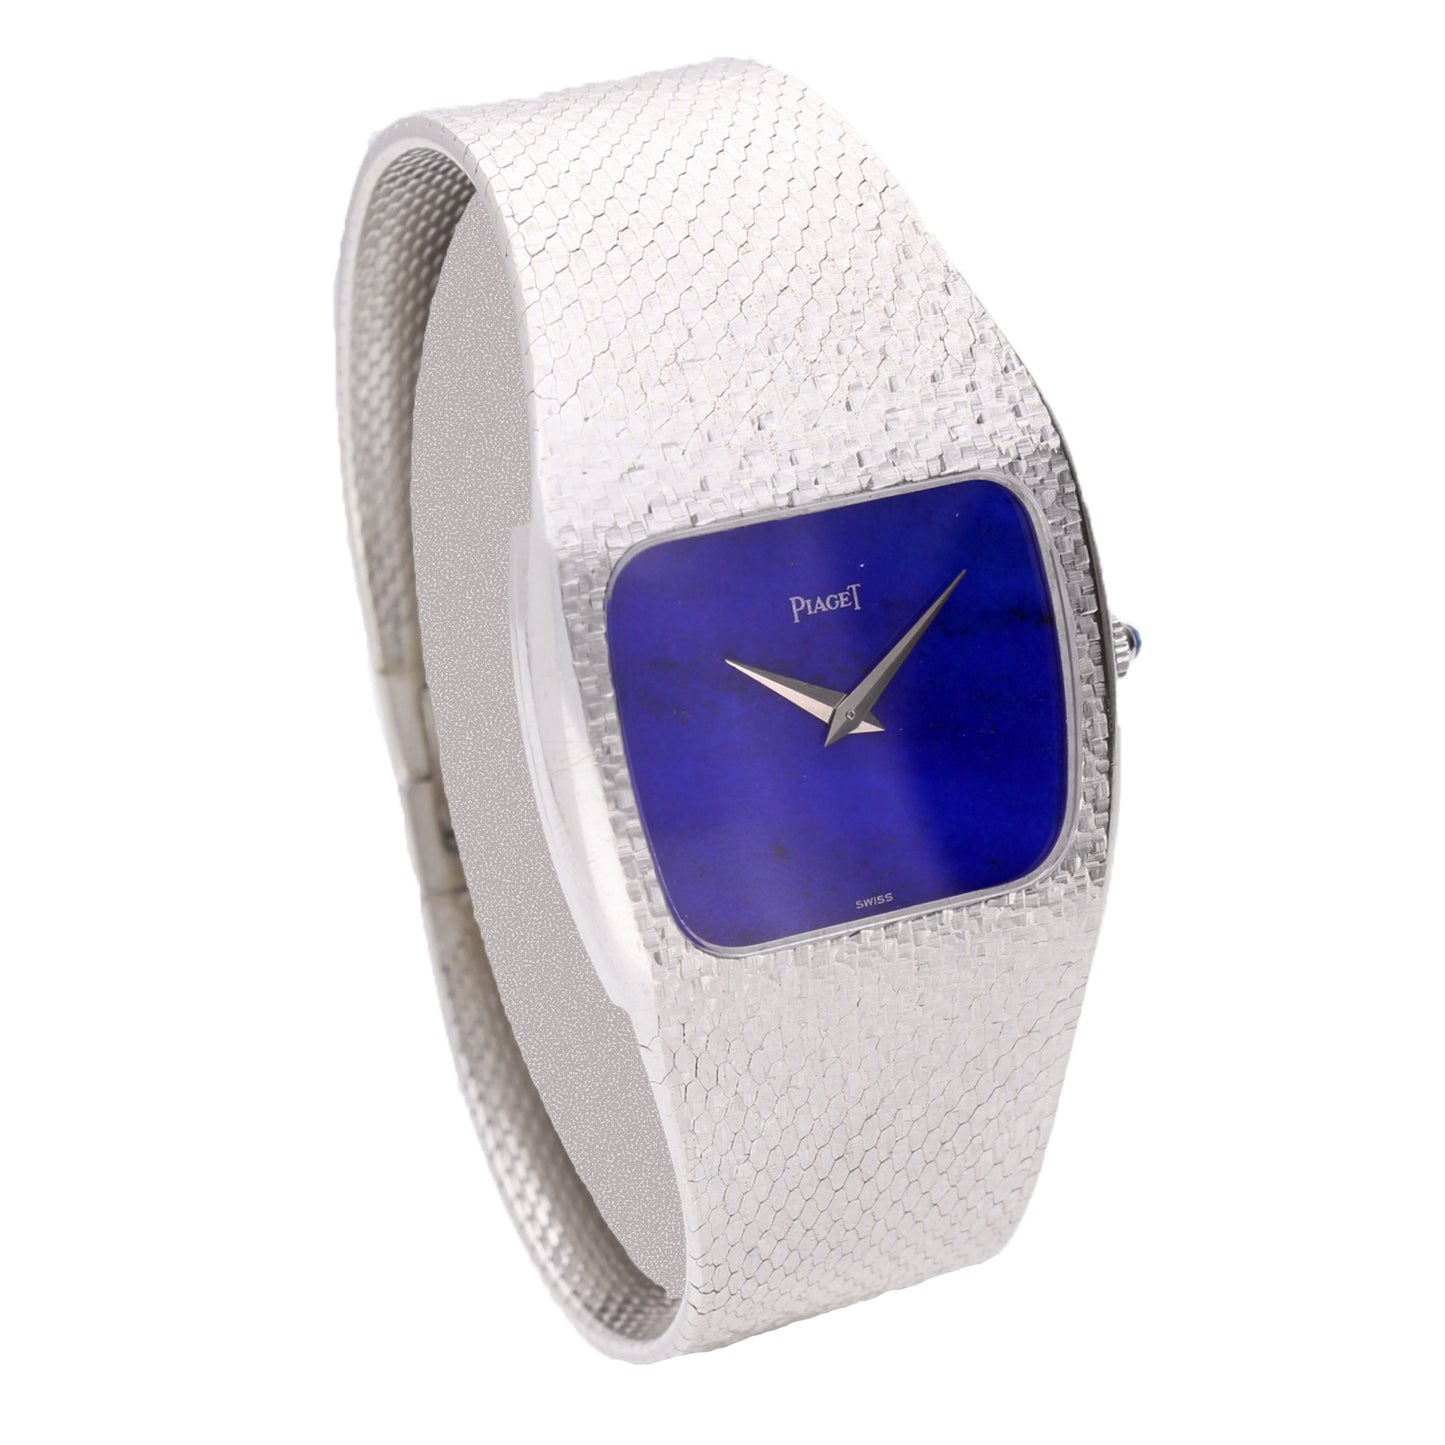 18ct white gold Piaget, reference 9458 bracelet watch with Lapis Lazuli dial. Made 1970's